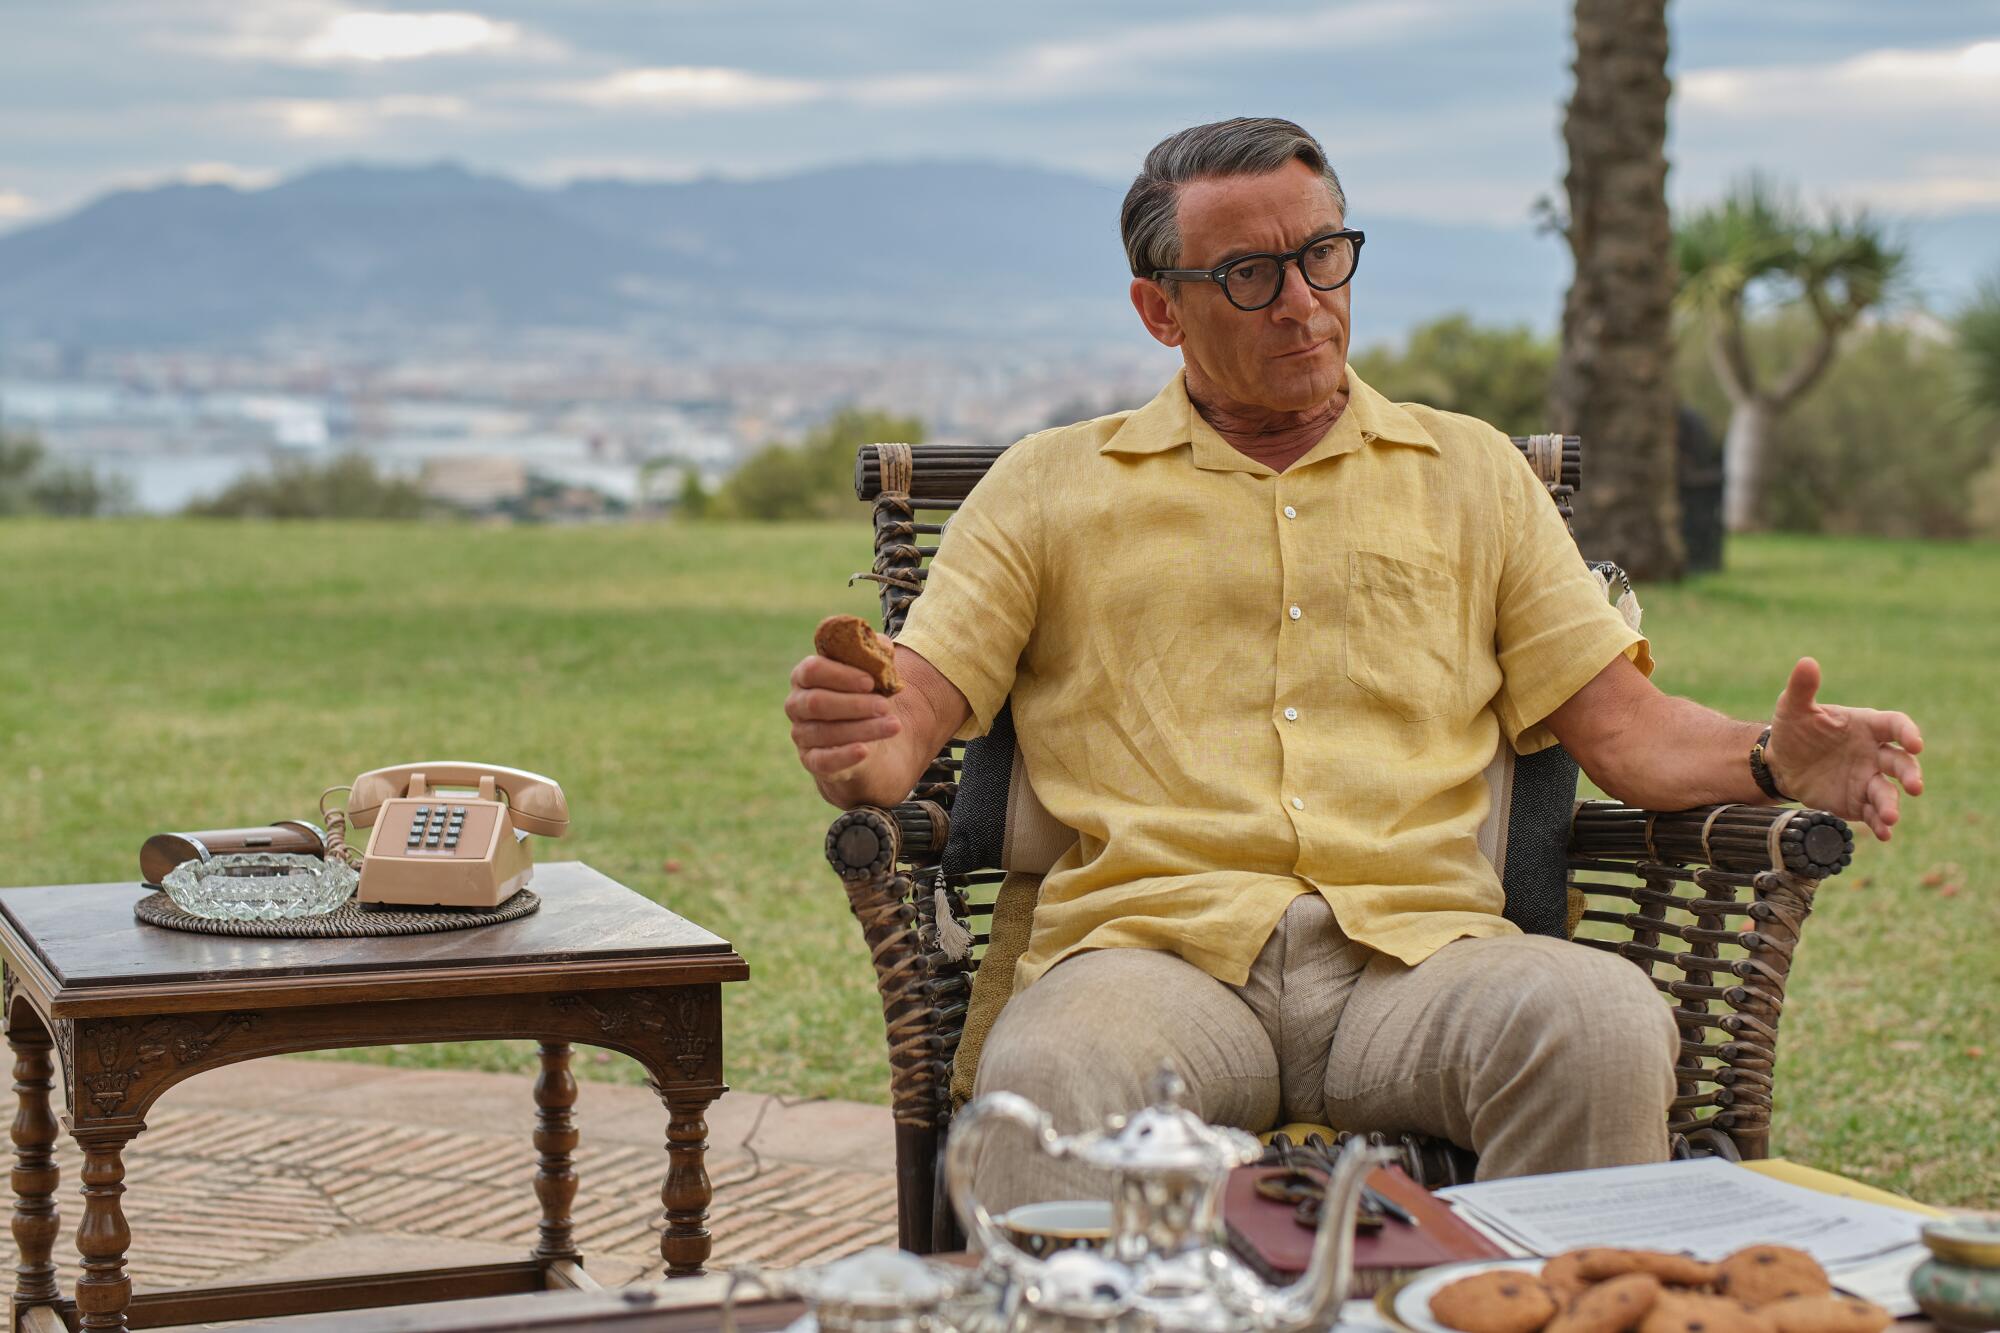 Jason Isaacs as Cary Grant in a yellow shirt and khakis sitting in a chair outside.